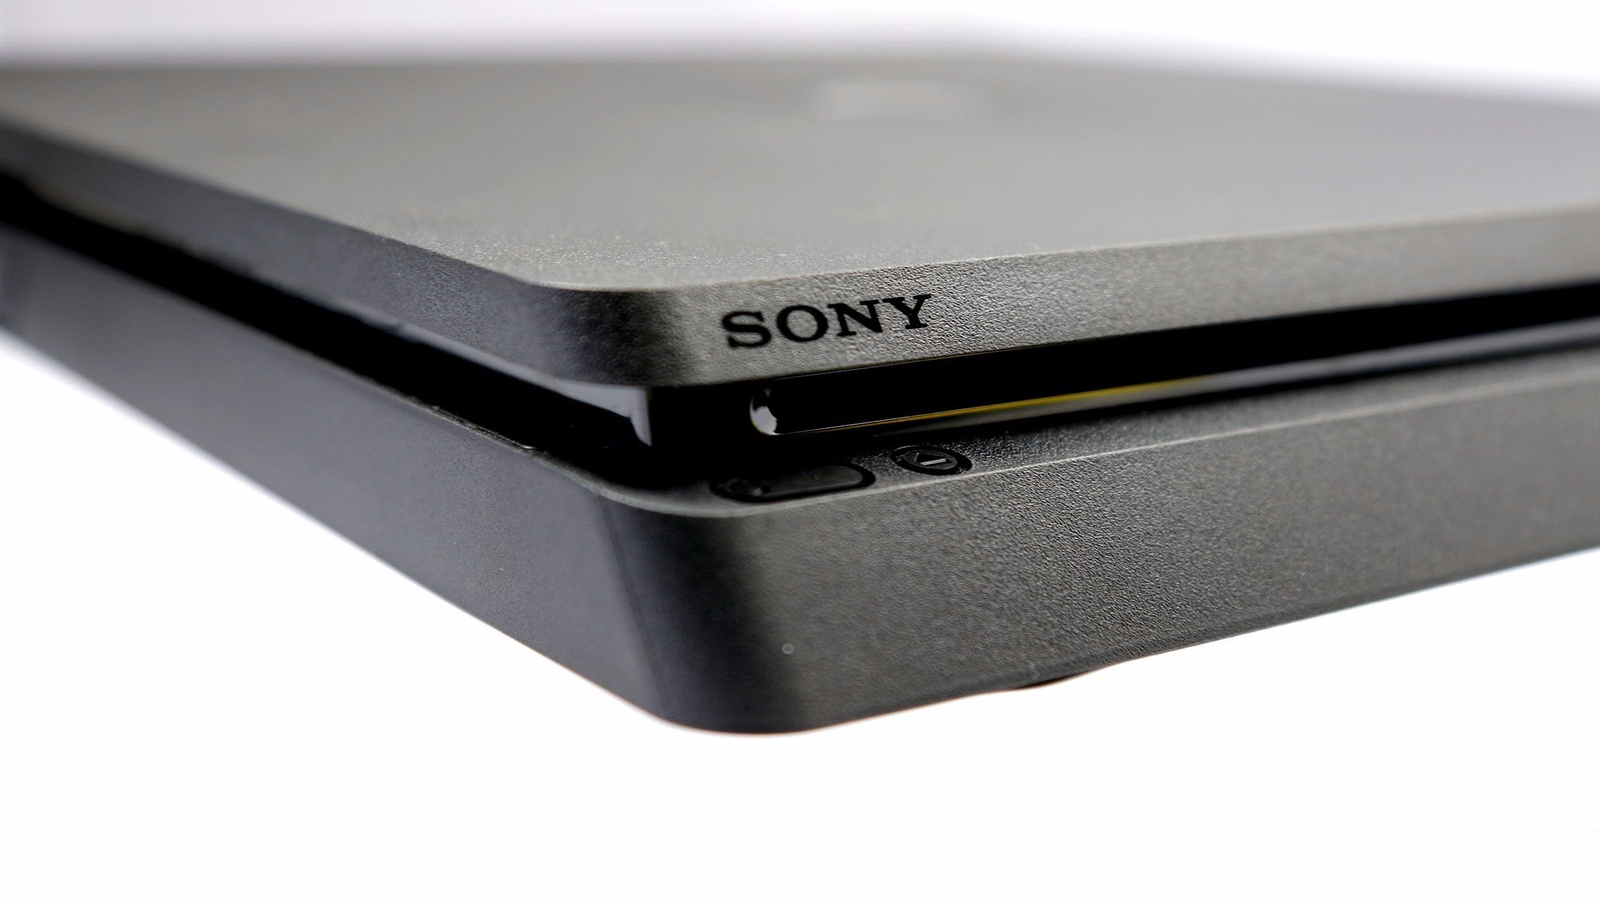 PS4 Slim: watch the new PlayStation console boot up here [Update